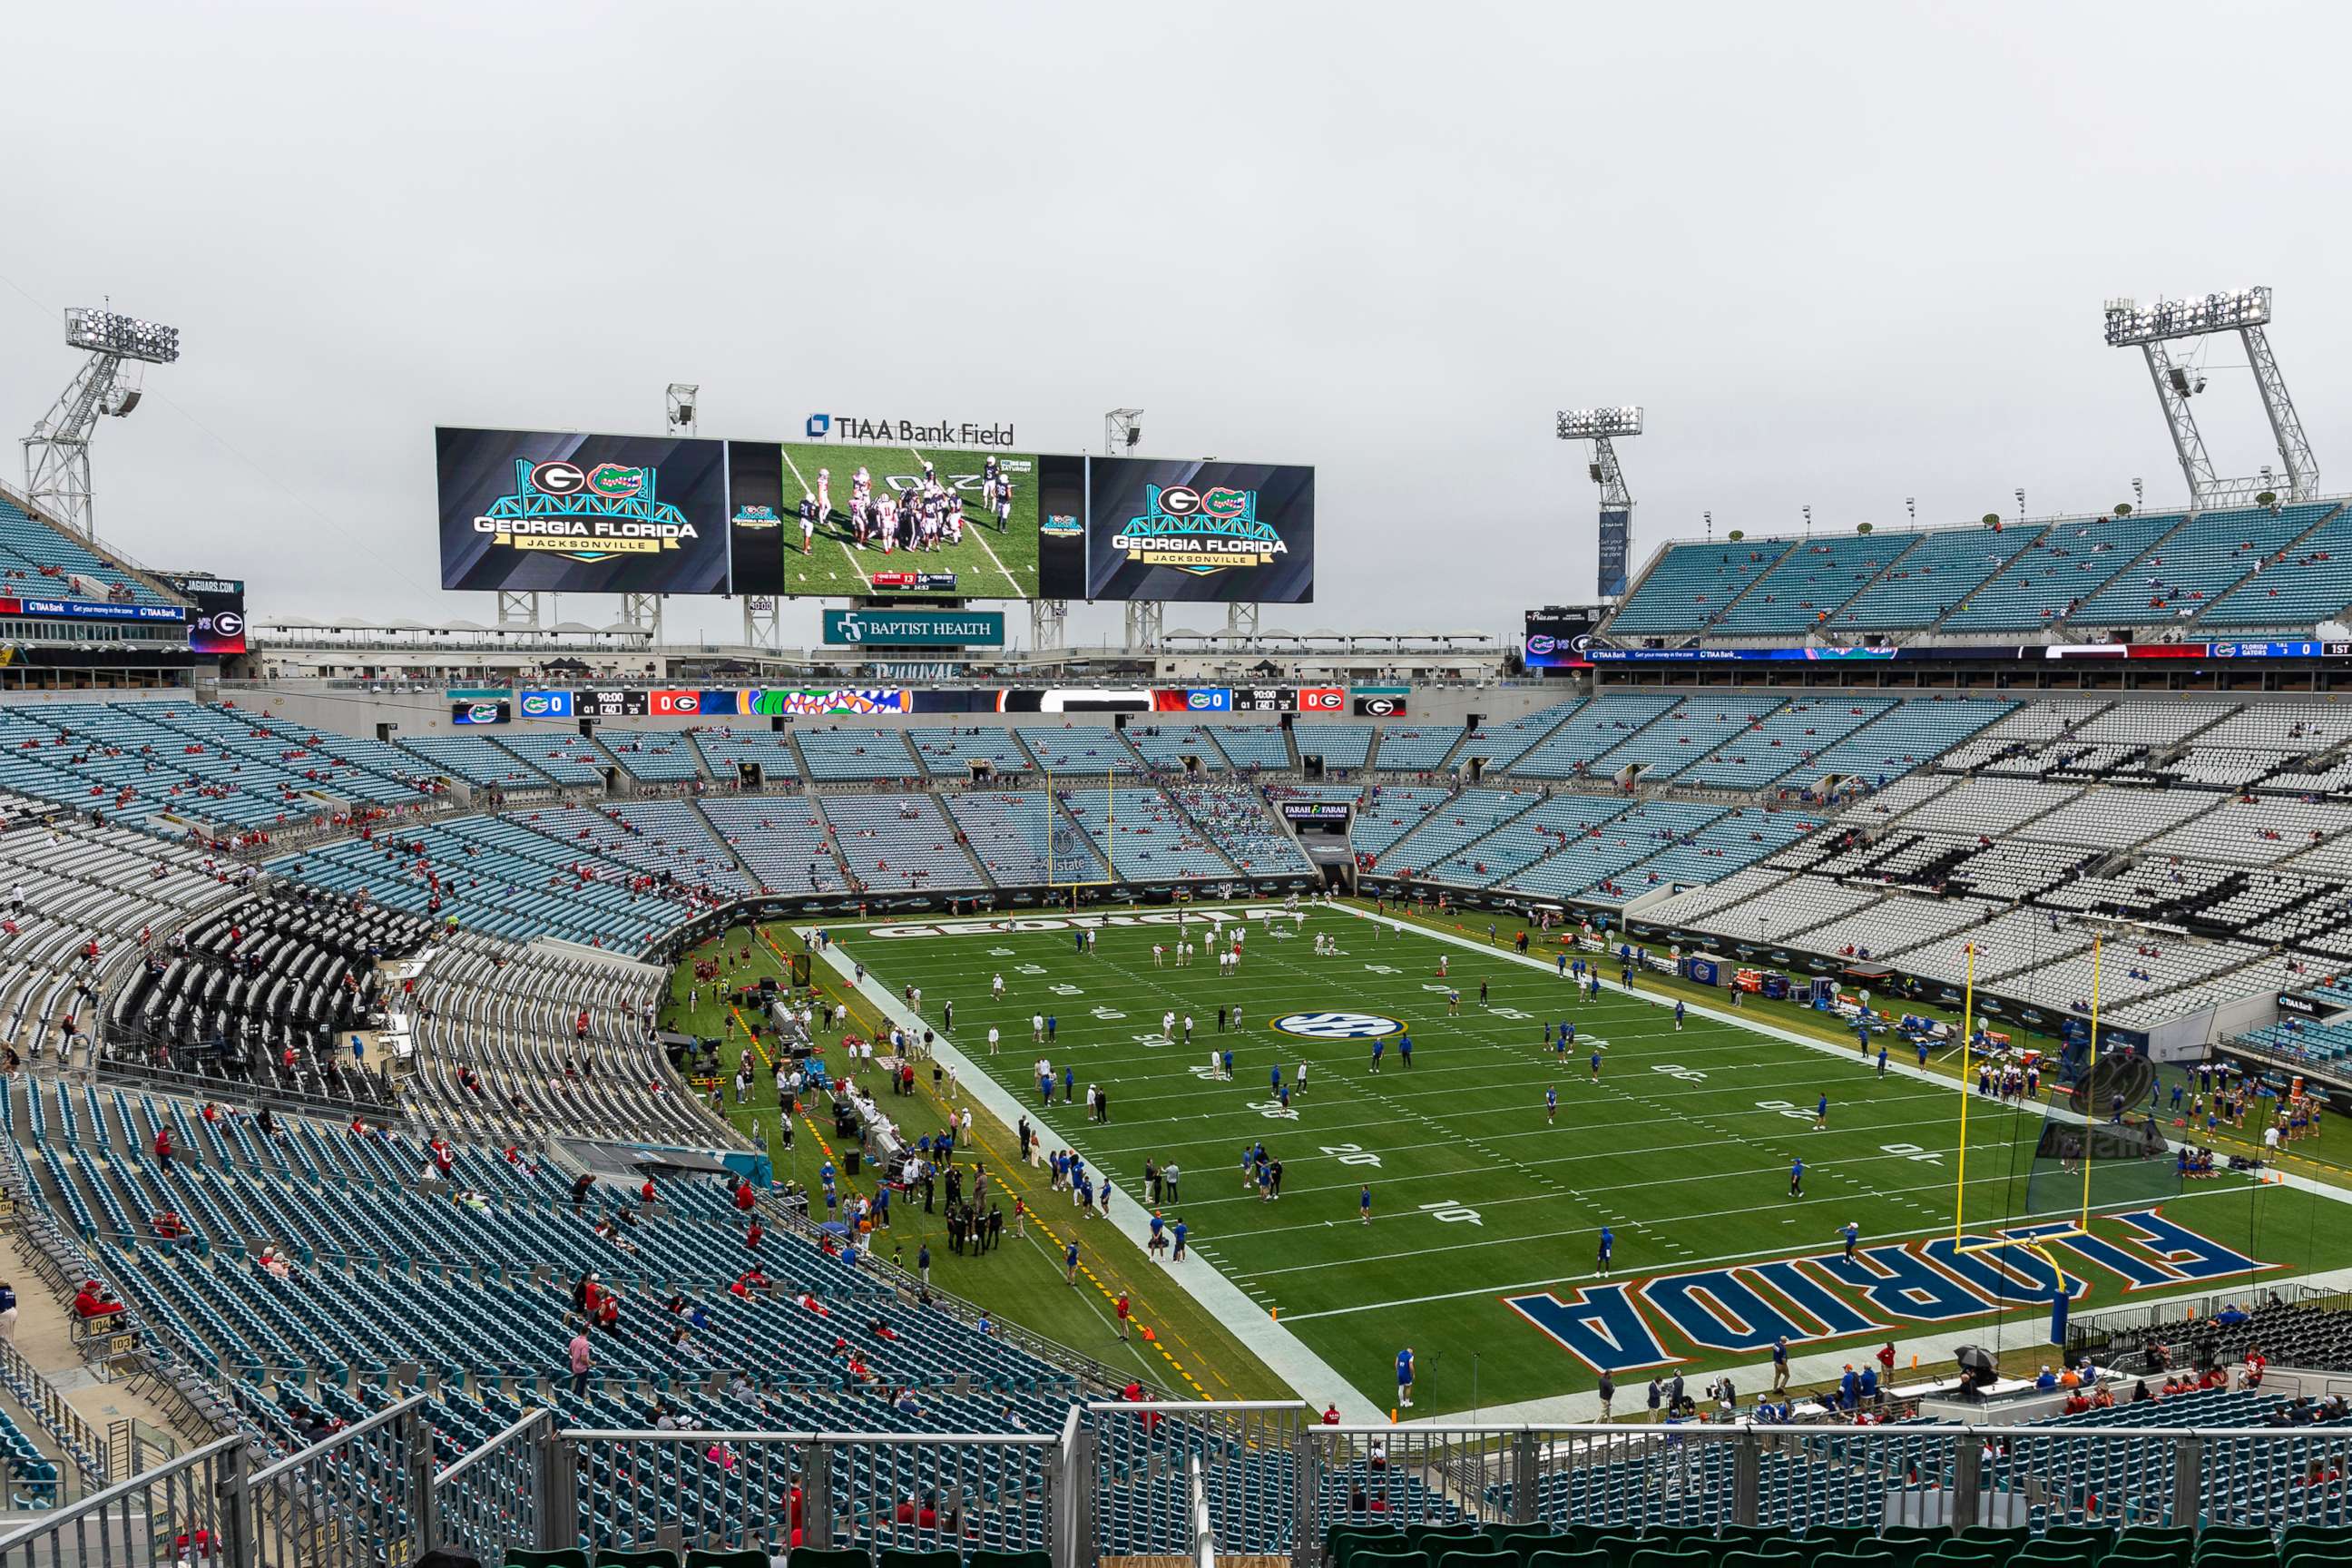 PHOTO: General view before the start of a game between the Georgia Bulldogs and the Florida Gators at TIAA Bank Field on Oct. 29, 2022, in Jacksonville, Fla.